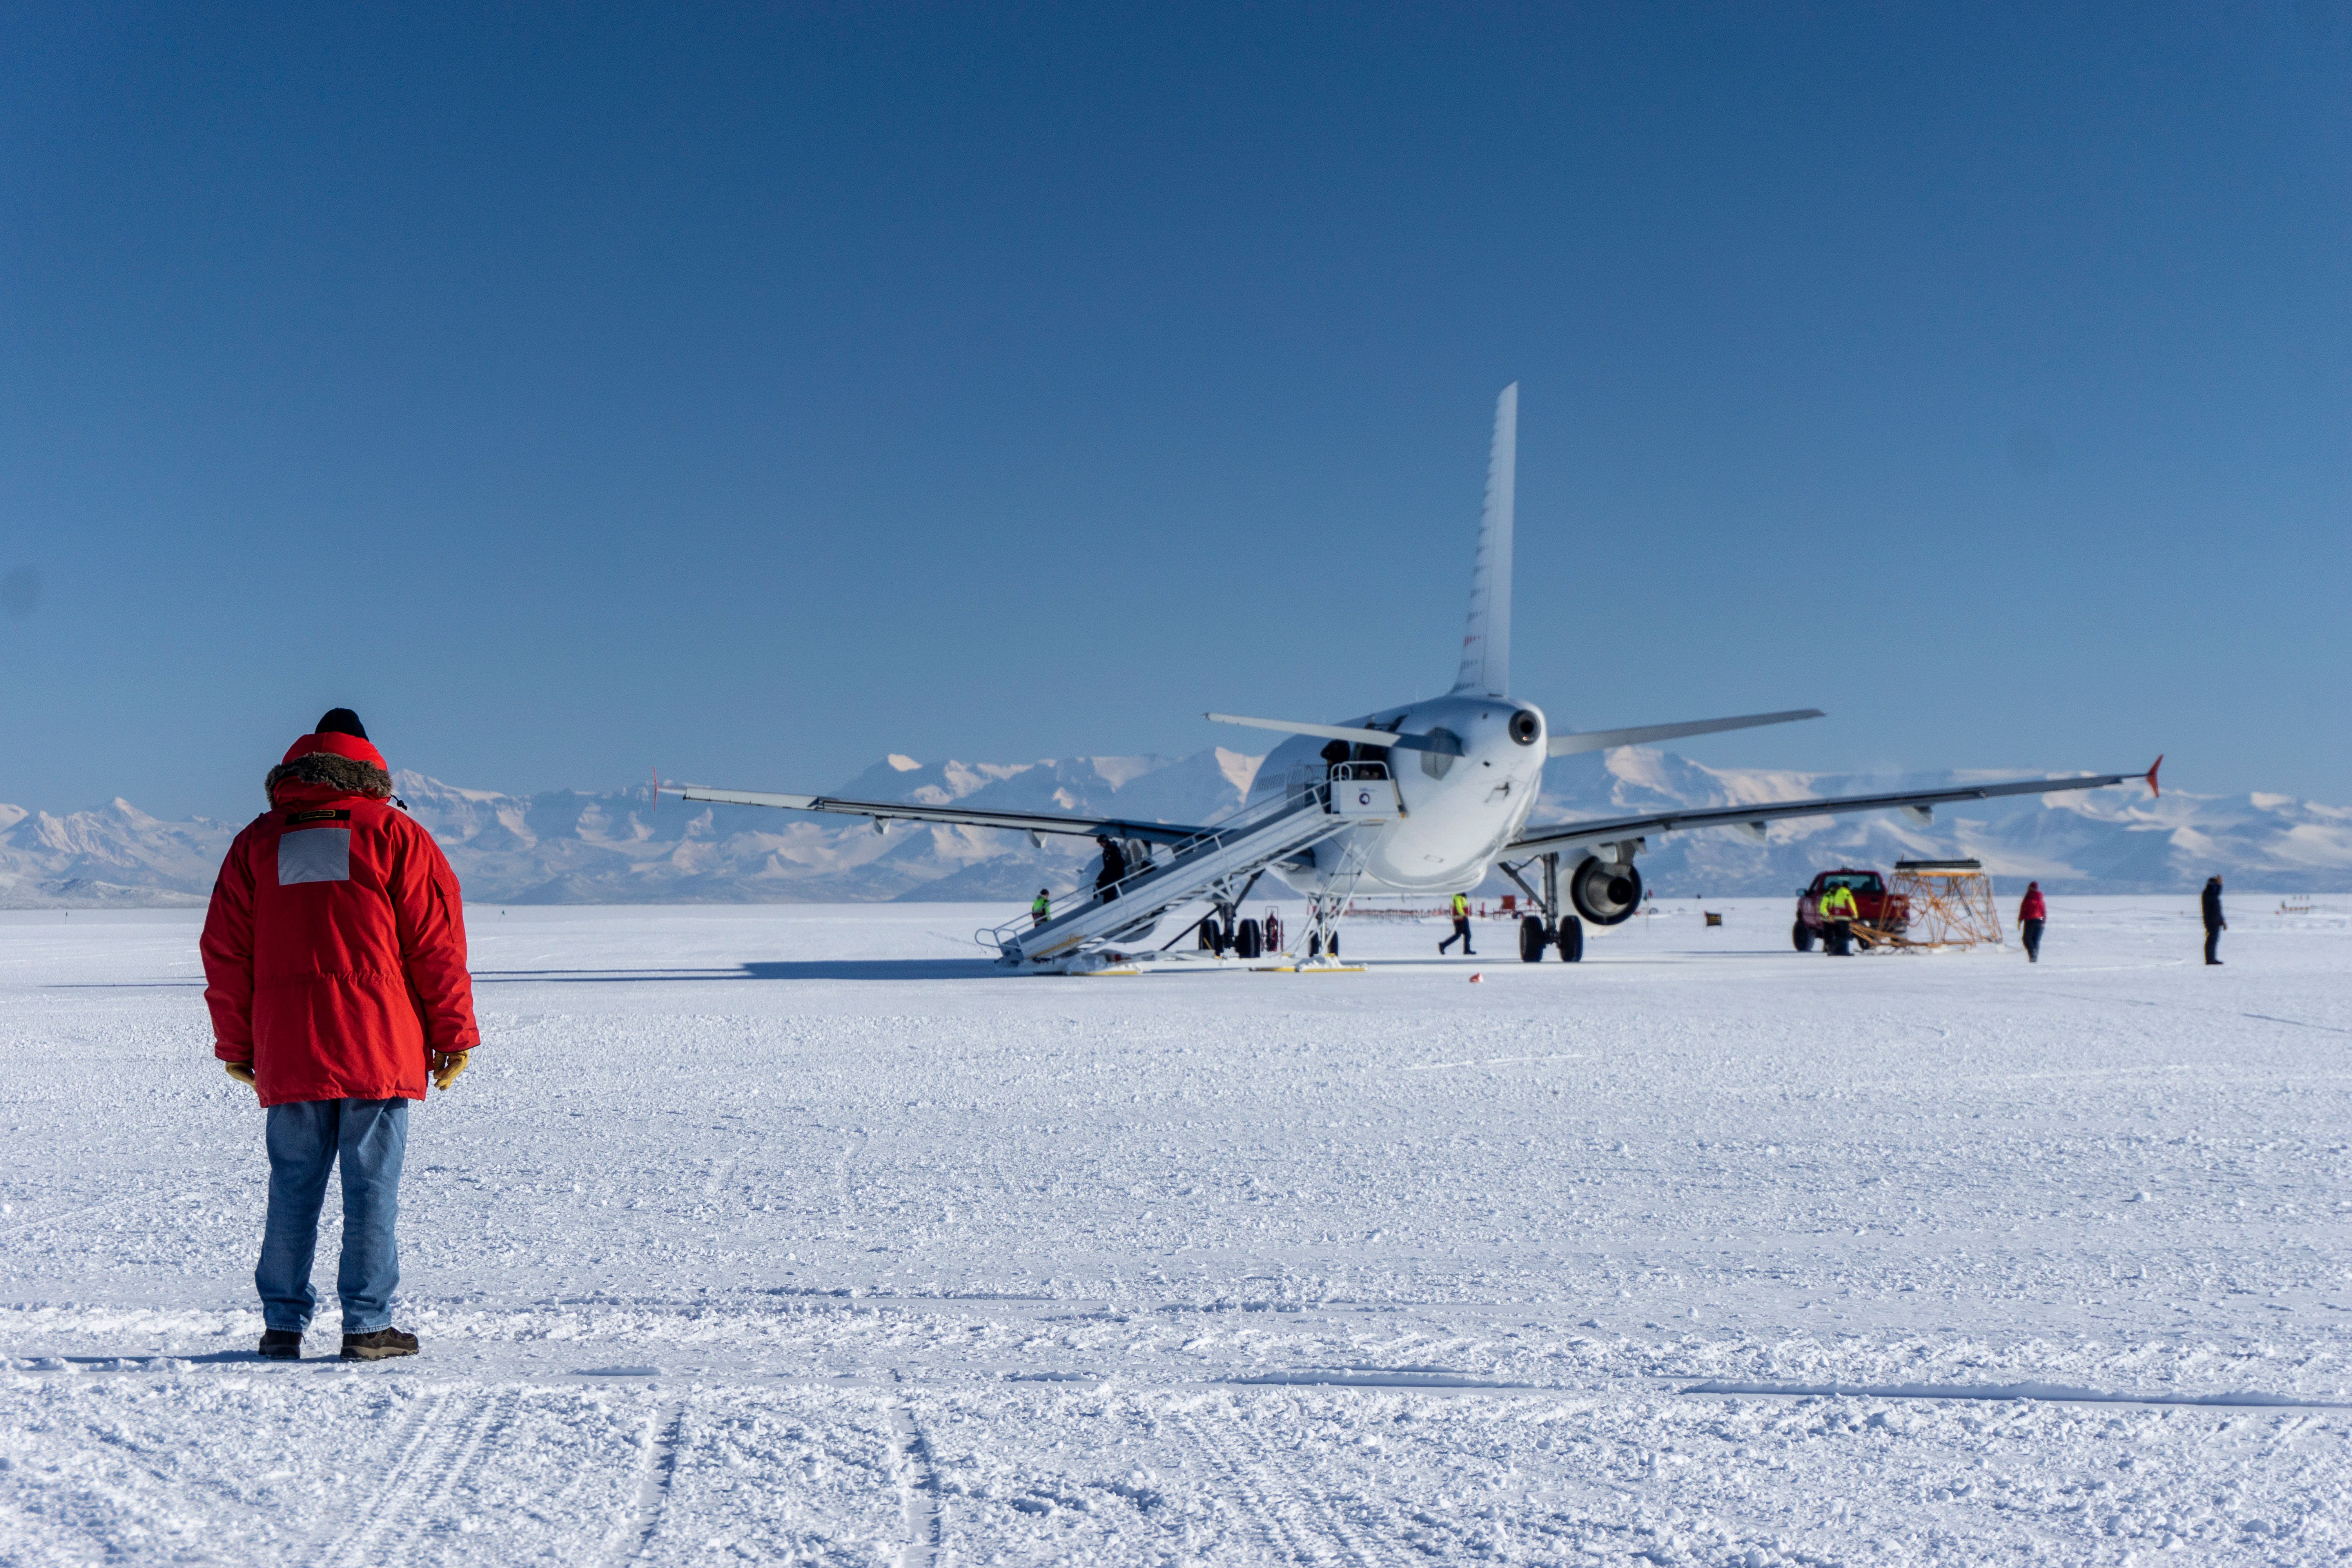 An Airbus parked near Mcmurdo station in Antarctica.